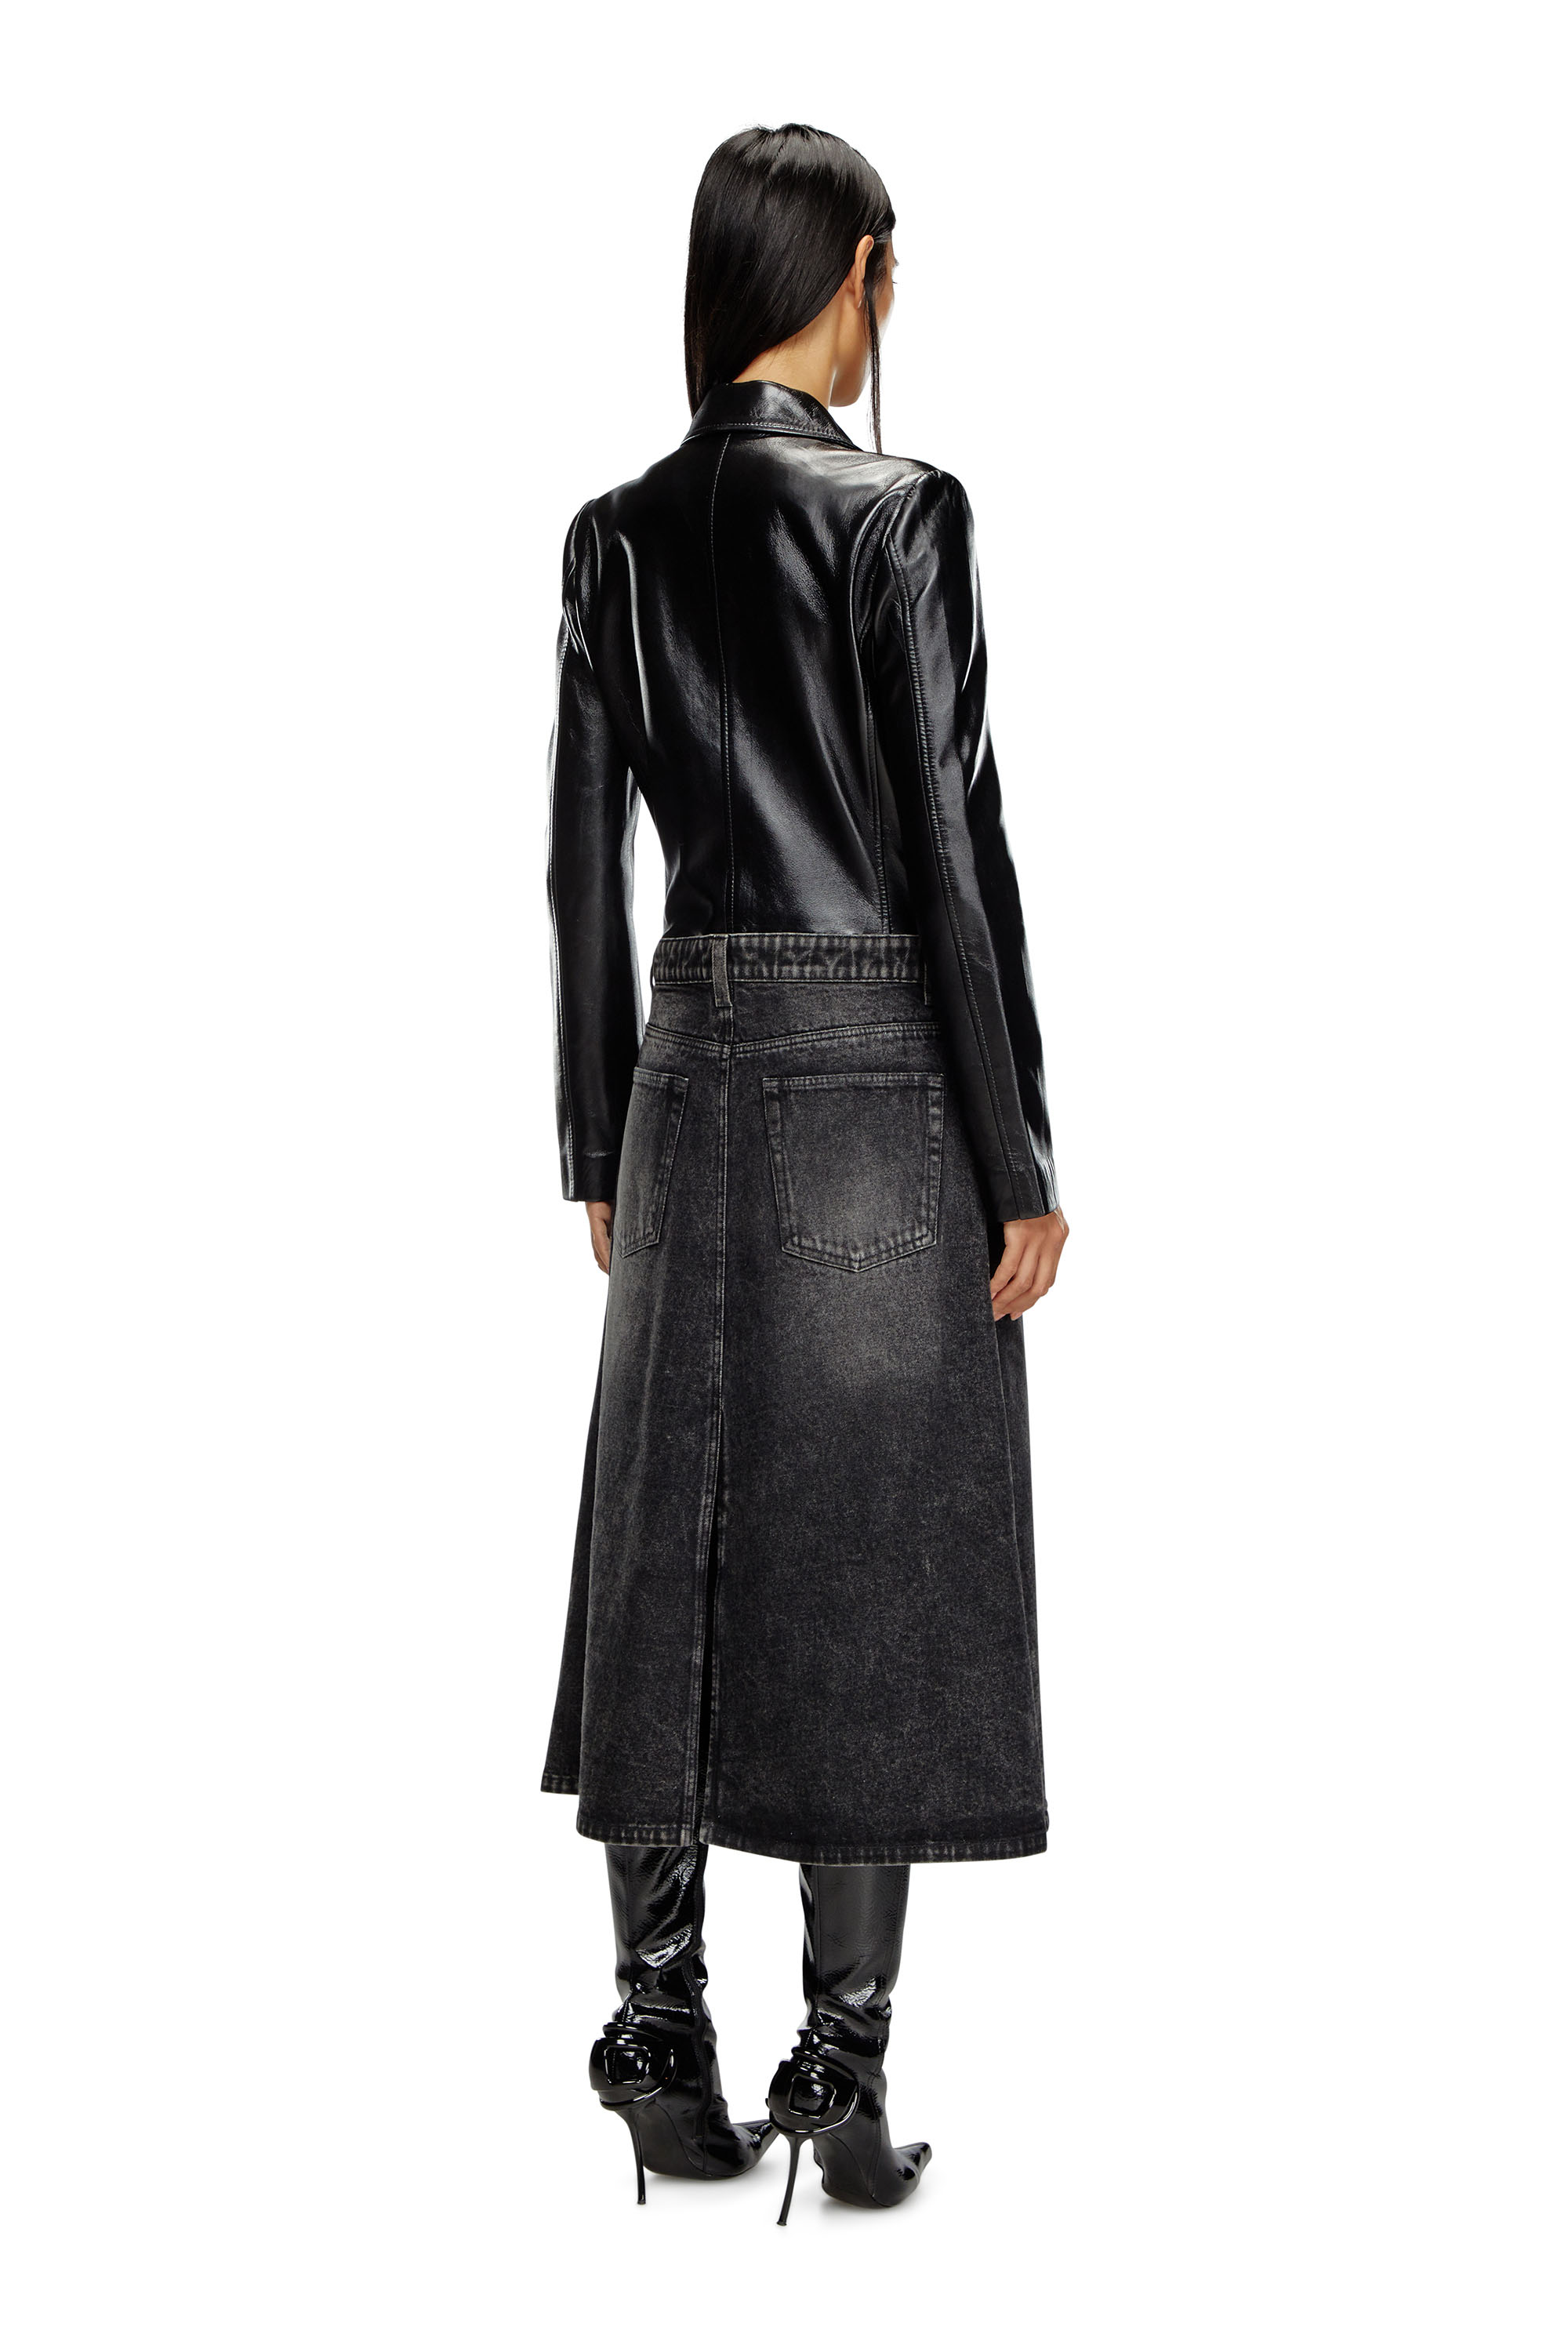 Diesel - L-ORY, Woman Hybrid coat in denim and leather in Black - Image 4